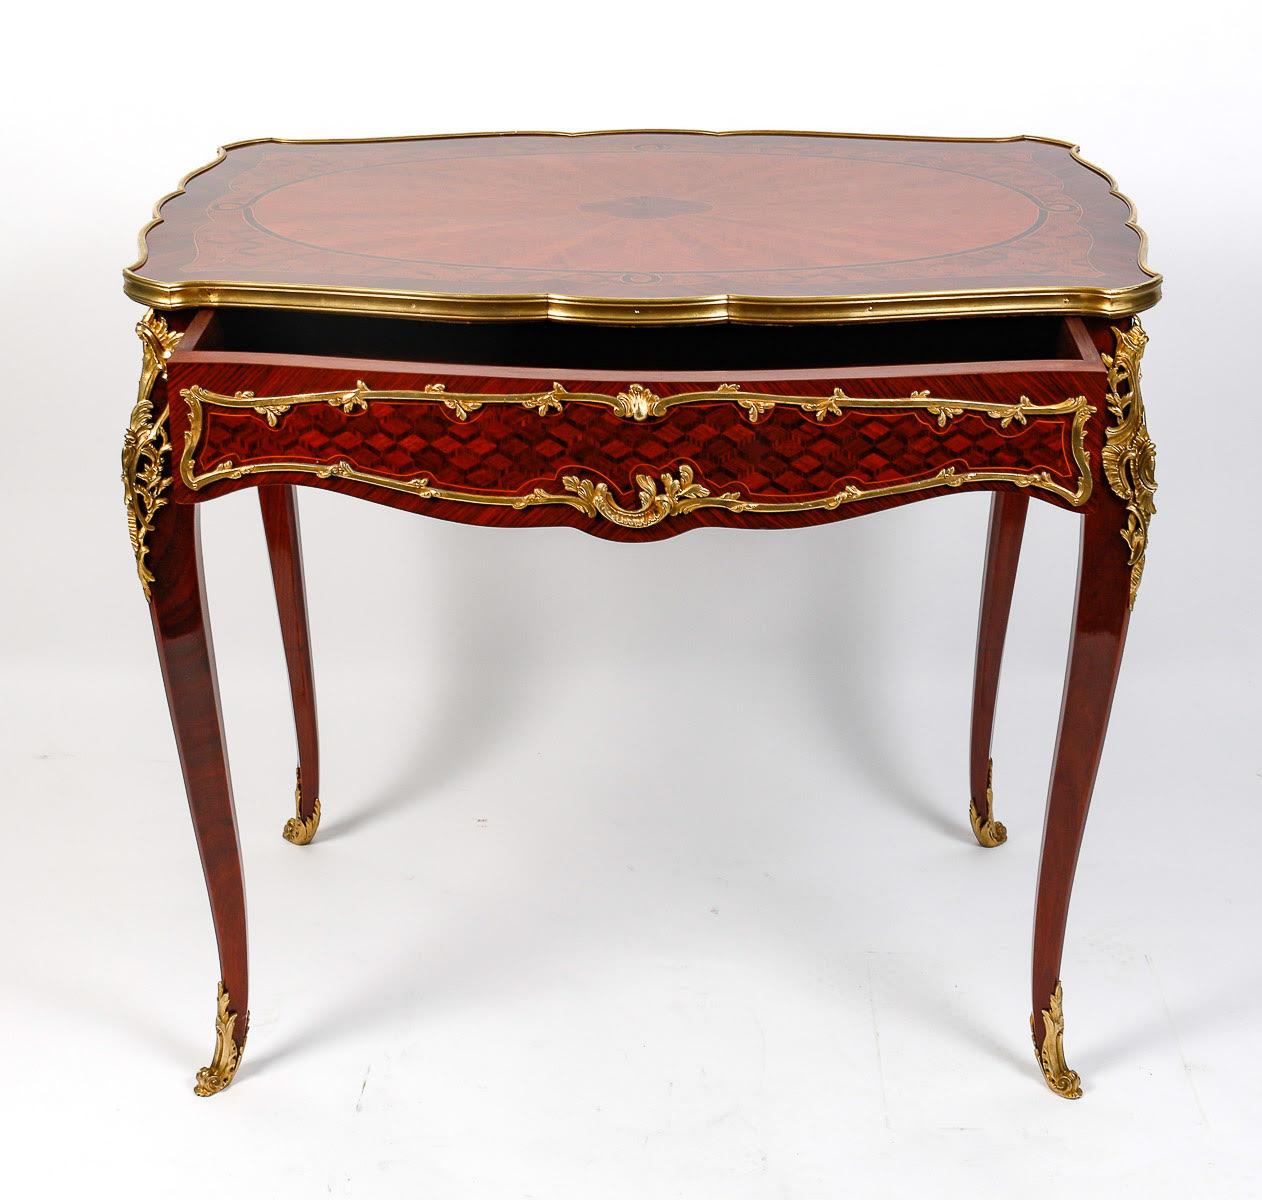 Gilt Louis XV Style Desk and Side Table, 19th Century.